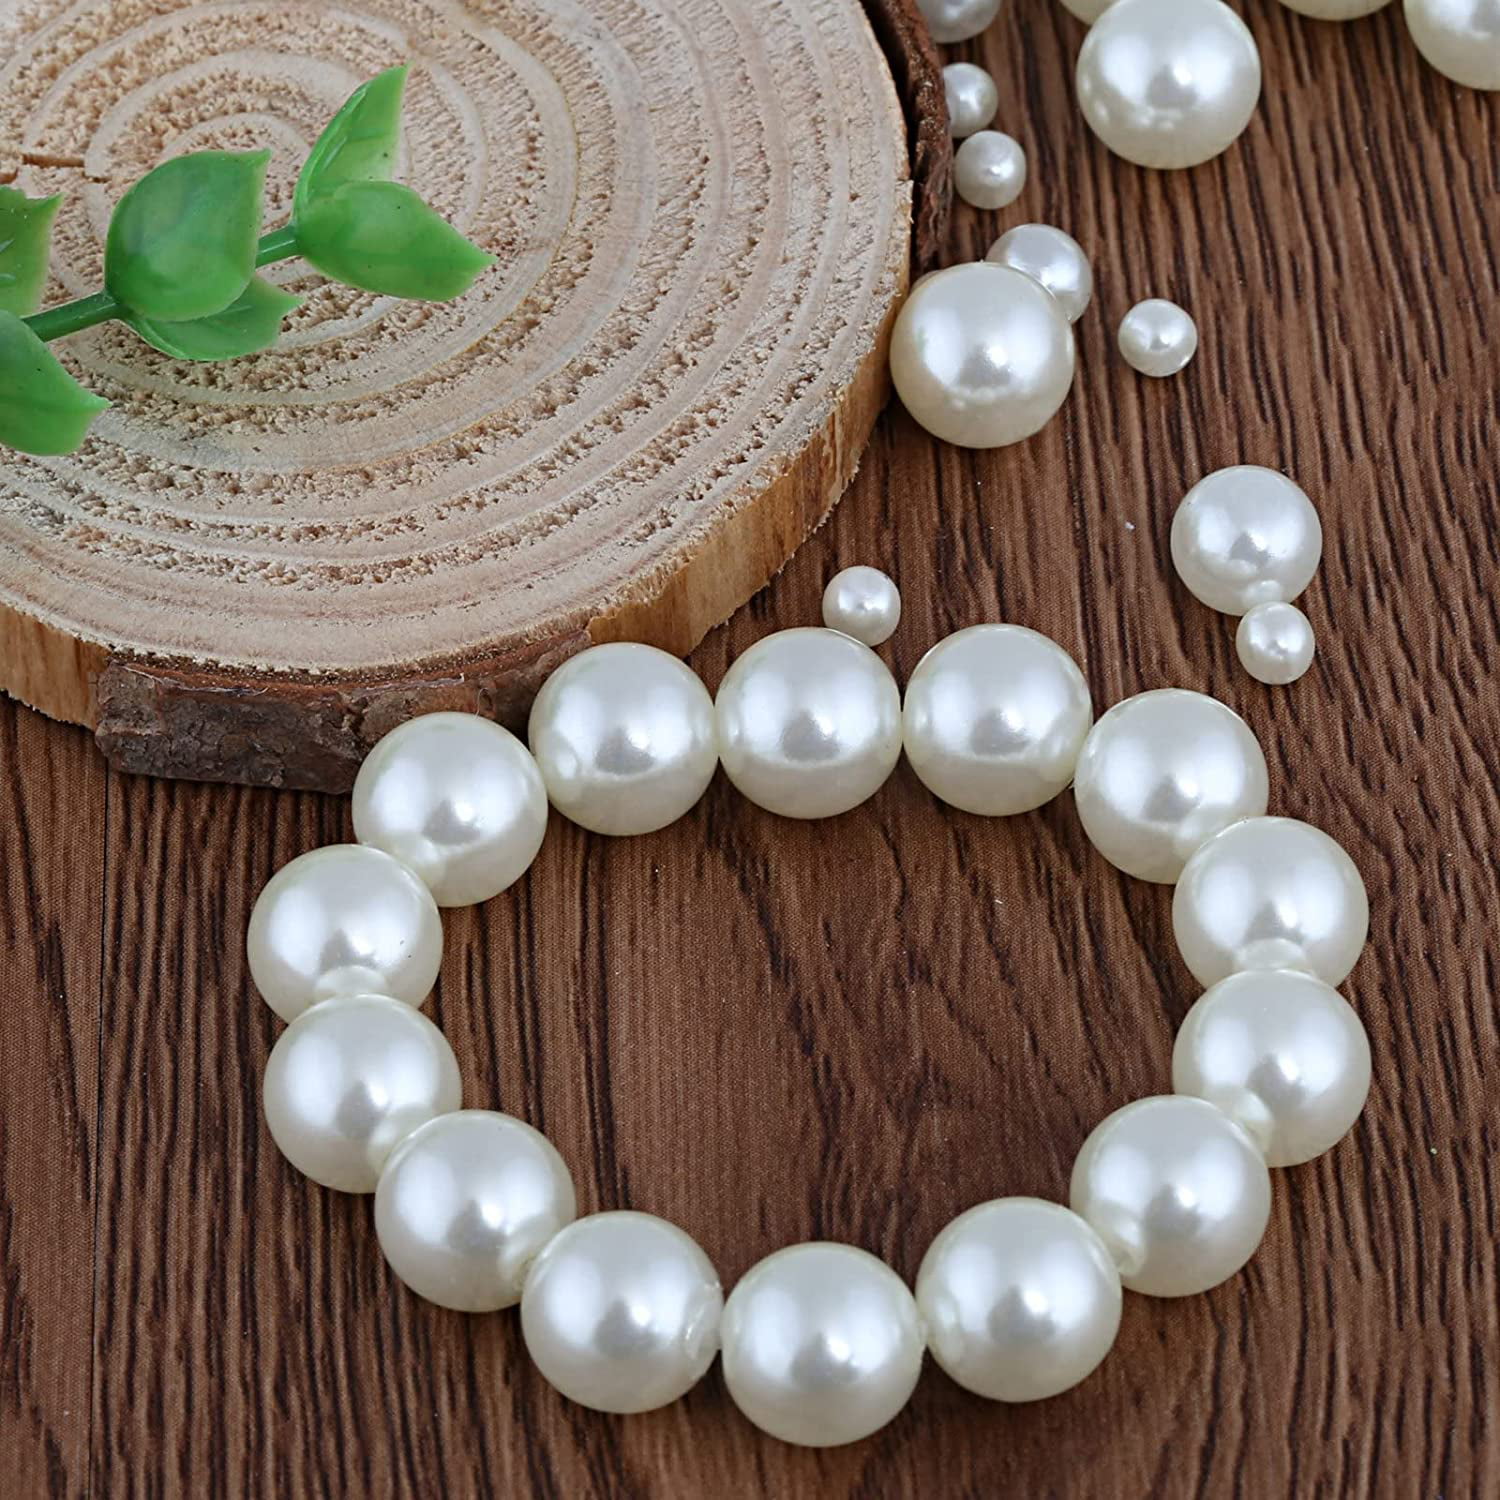 Keusn White Flat Back Pearl Half Round Pearls Beads Satin Luster Loose Beads Gems for DIY Craft Necklaces Bracelets Jewelry Decorations Wedding Dress